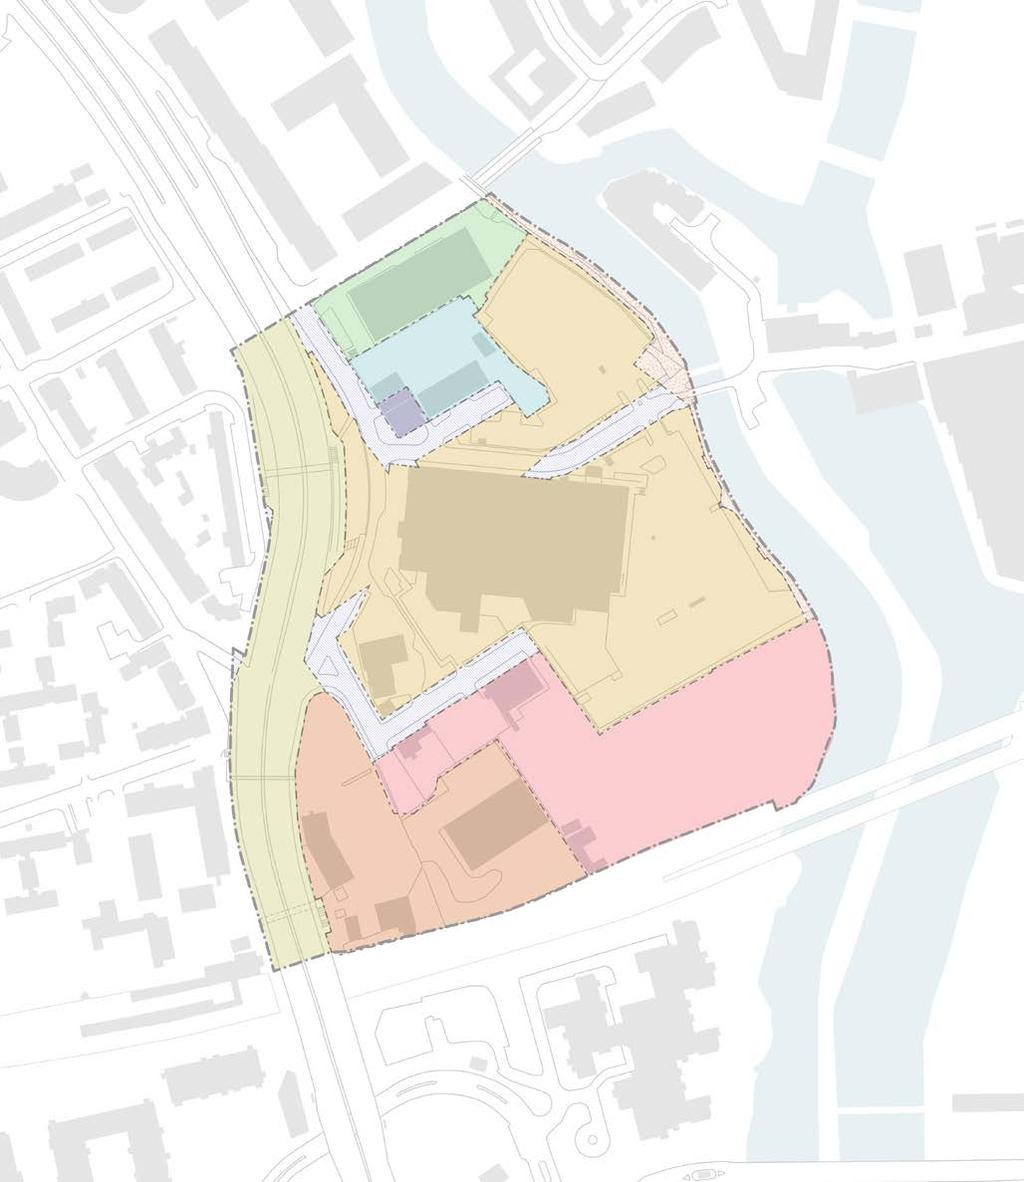 1 2 1 3 1 Plan showing existing land ownership within the masterplan area 1 2 3